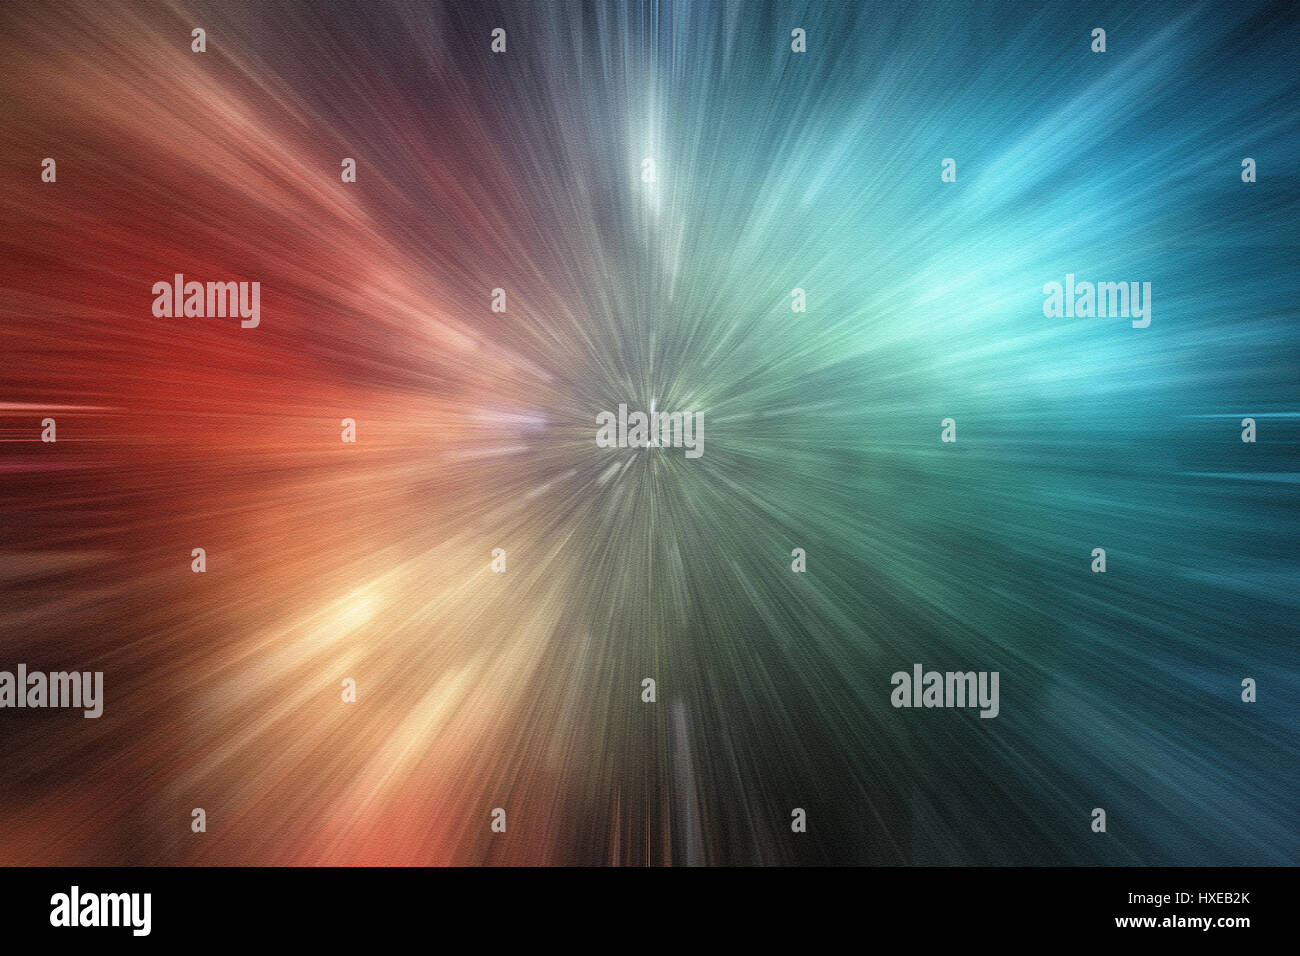 Zoom speed lights abstract background Stock Photo